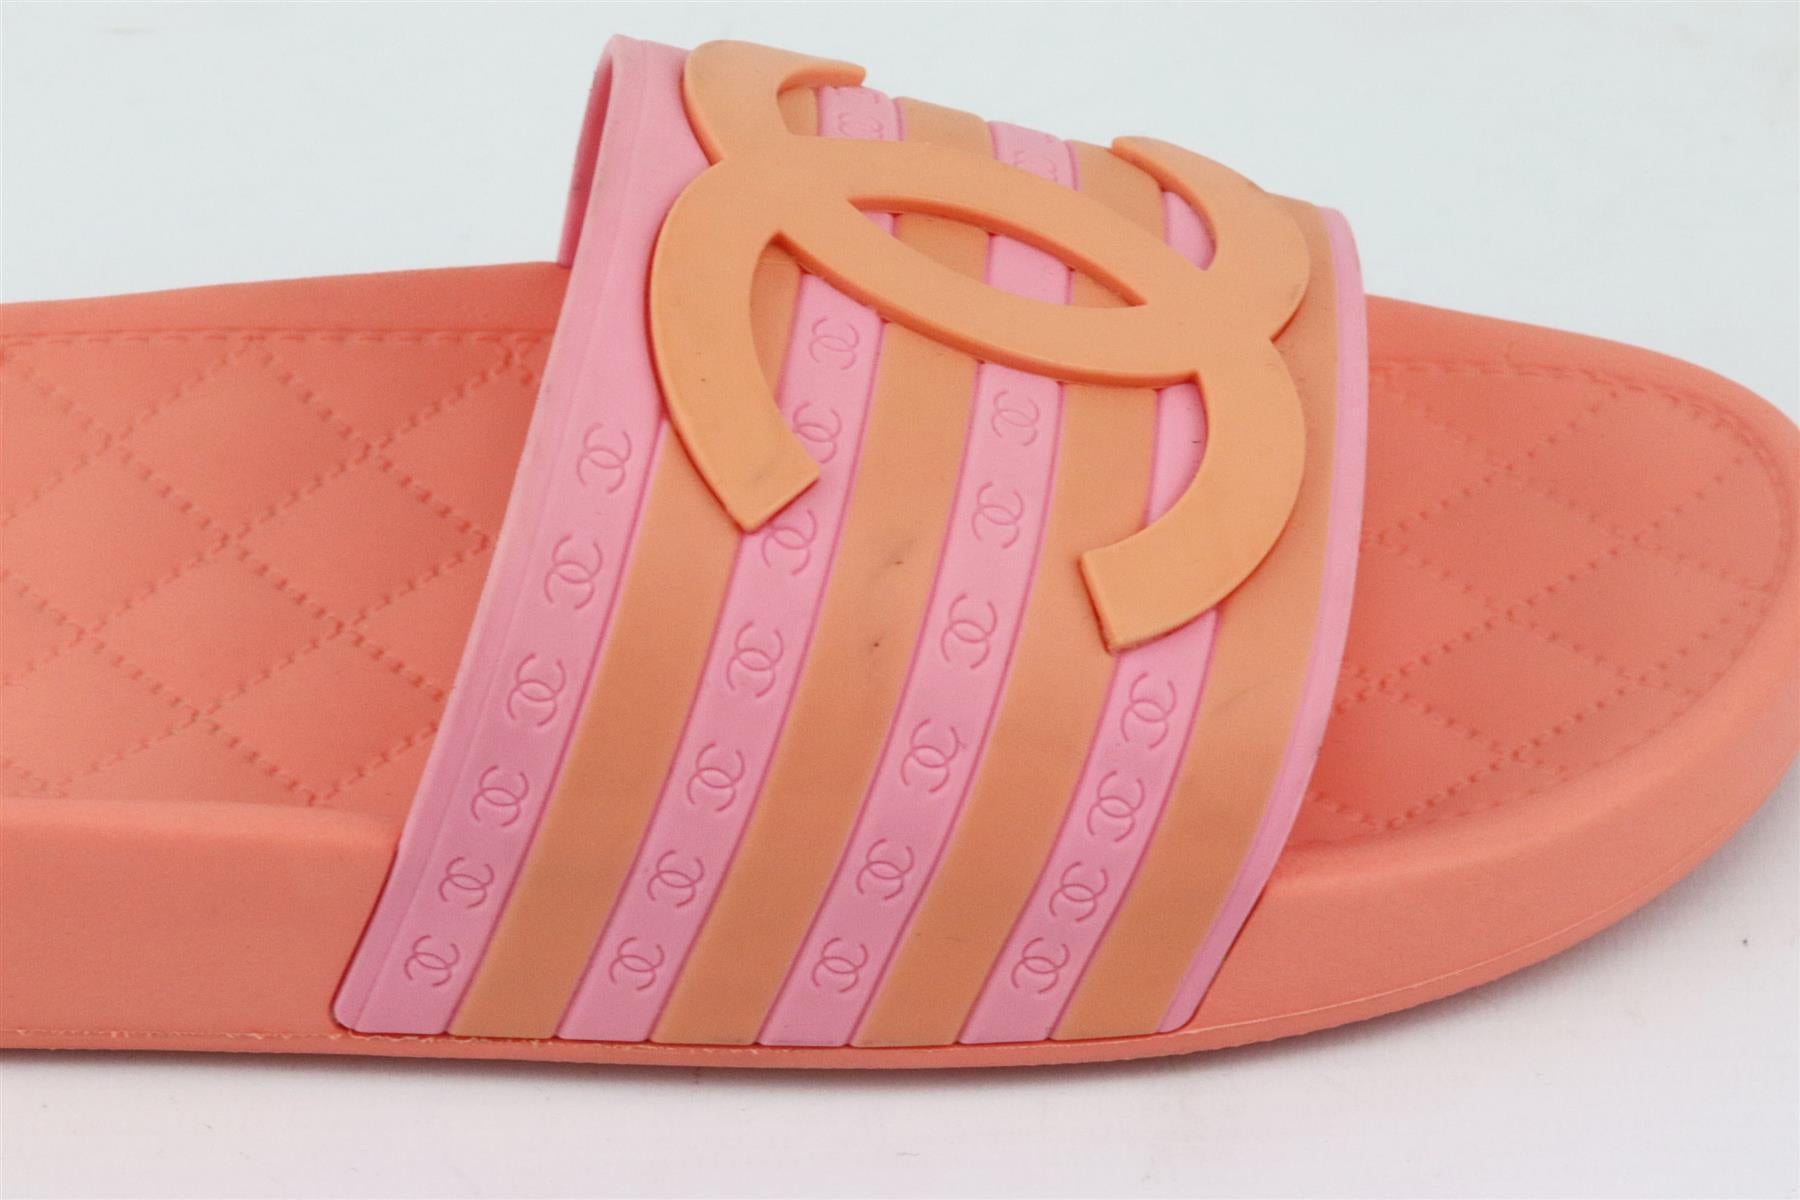 Chanel may specialize in luxurious bags, but the brand also designs great pieces that are suitable for everyday wear, these slides are made from CC detailed striped salmon and pink rubber and has a contoured footbed with gripped soles for comfort